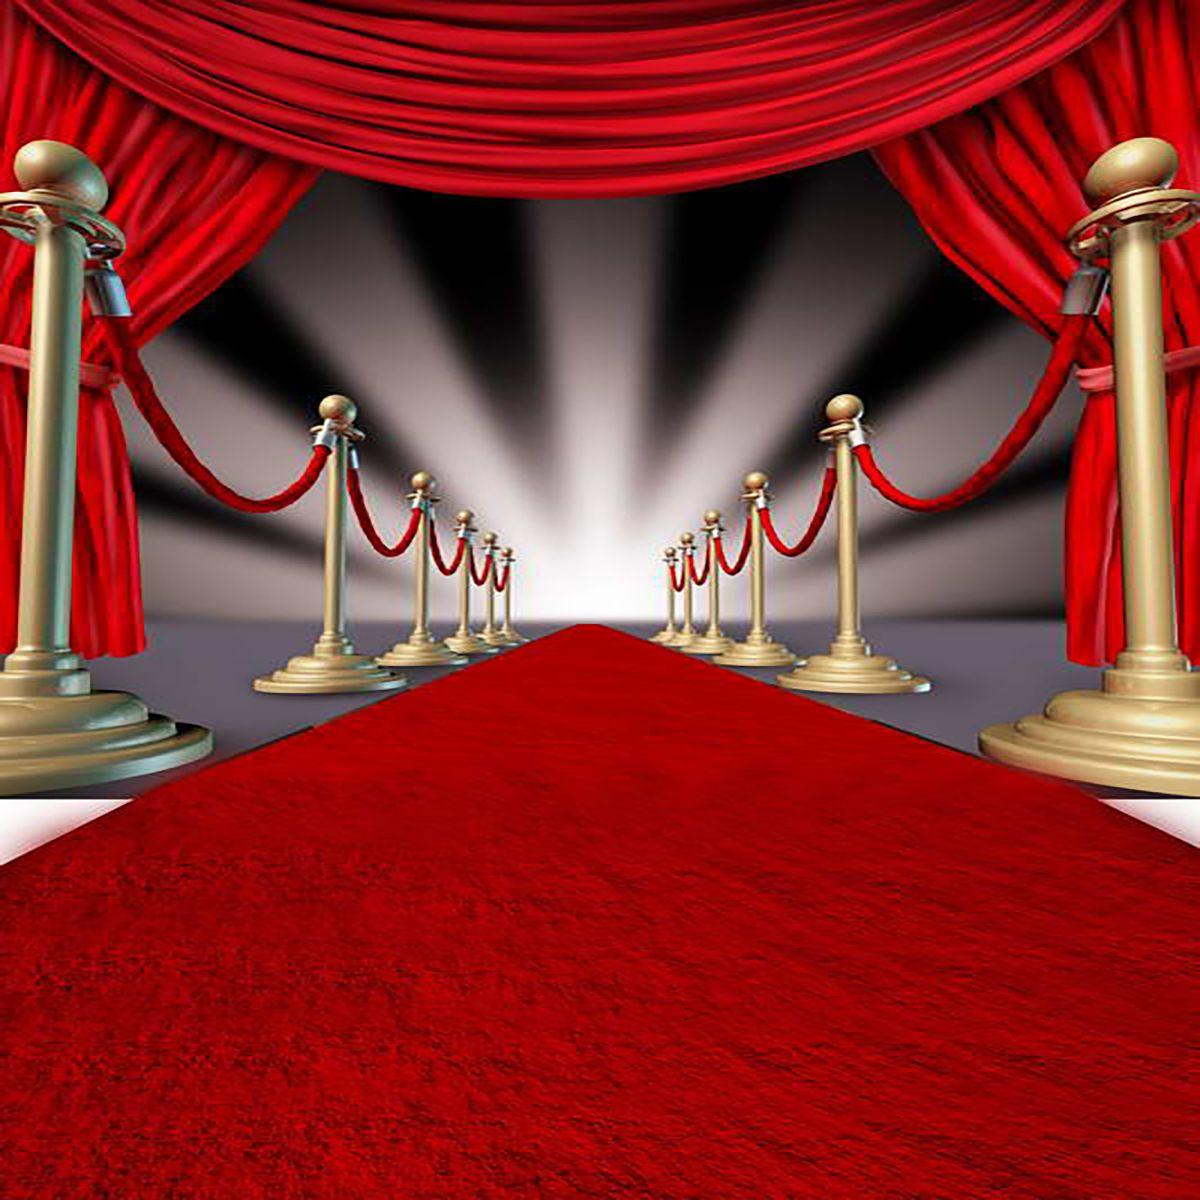 Allenjoy photographic background Ray red carpet striped curtain